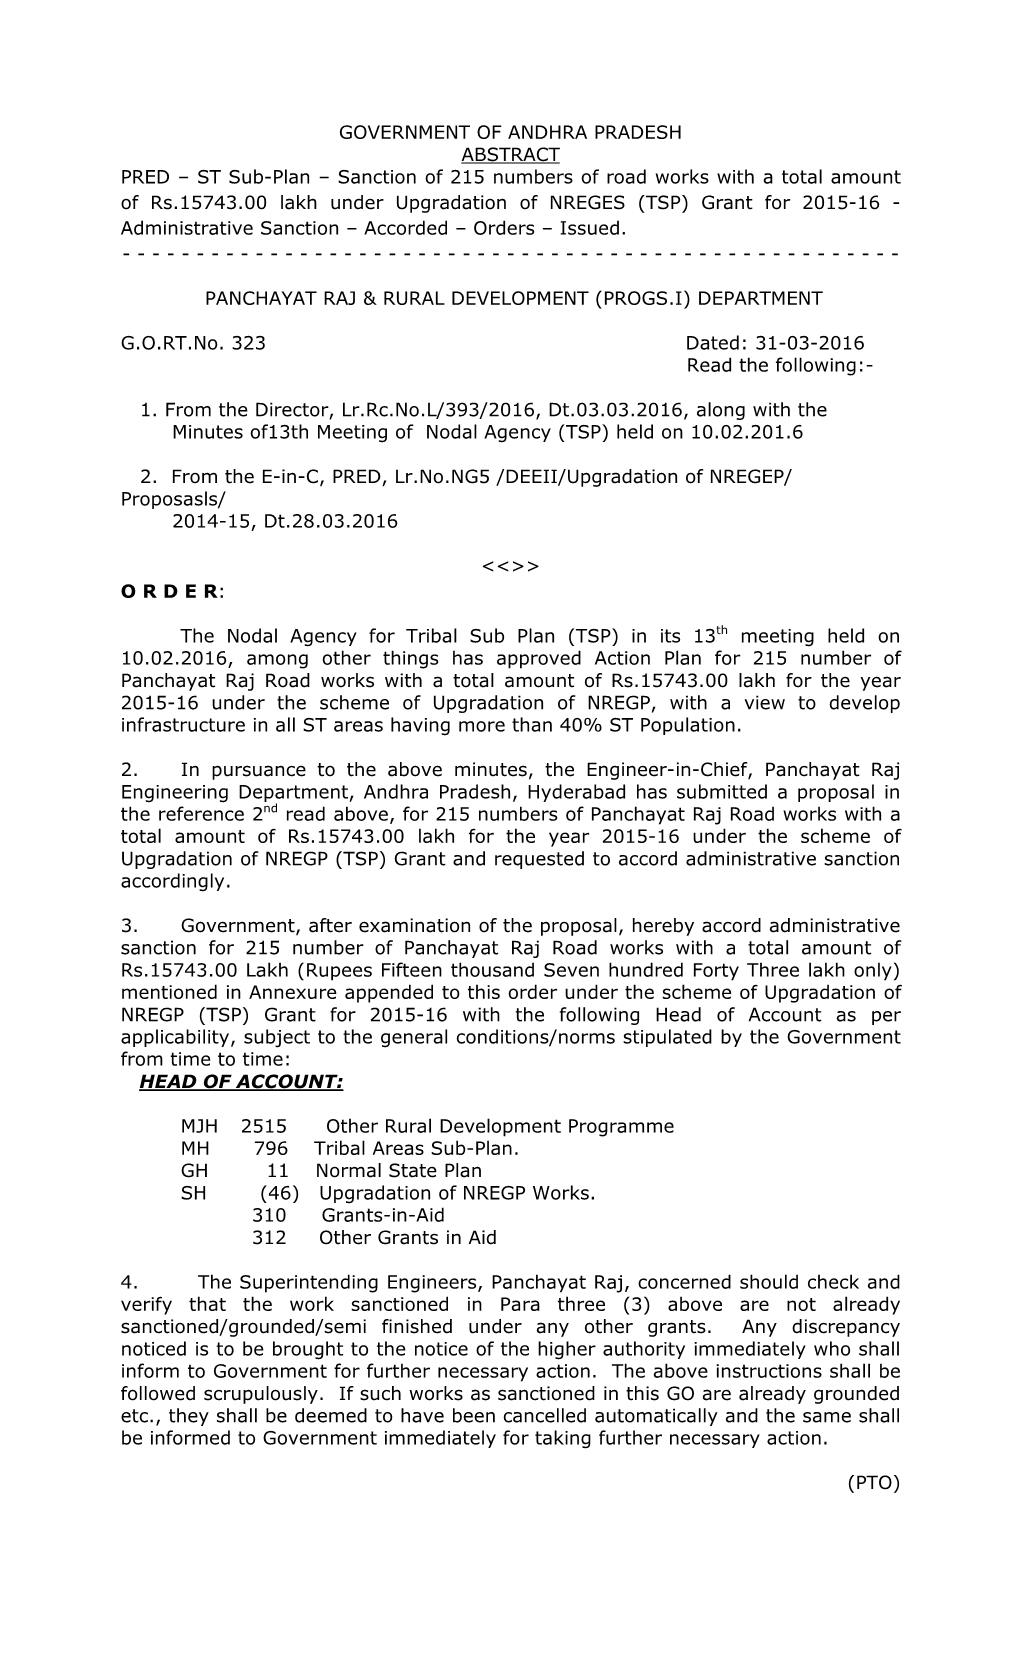 Government of Andhra Pradesh Abstract Pred – St